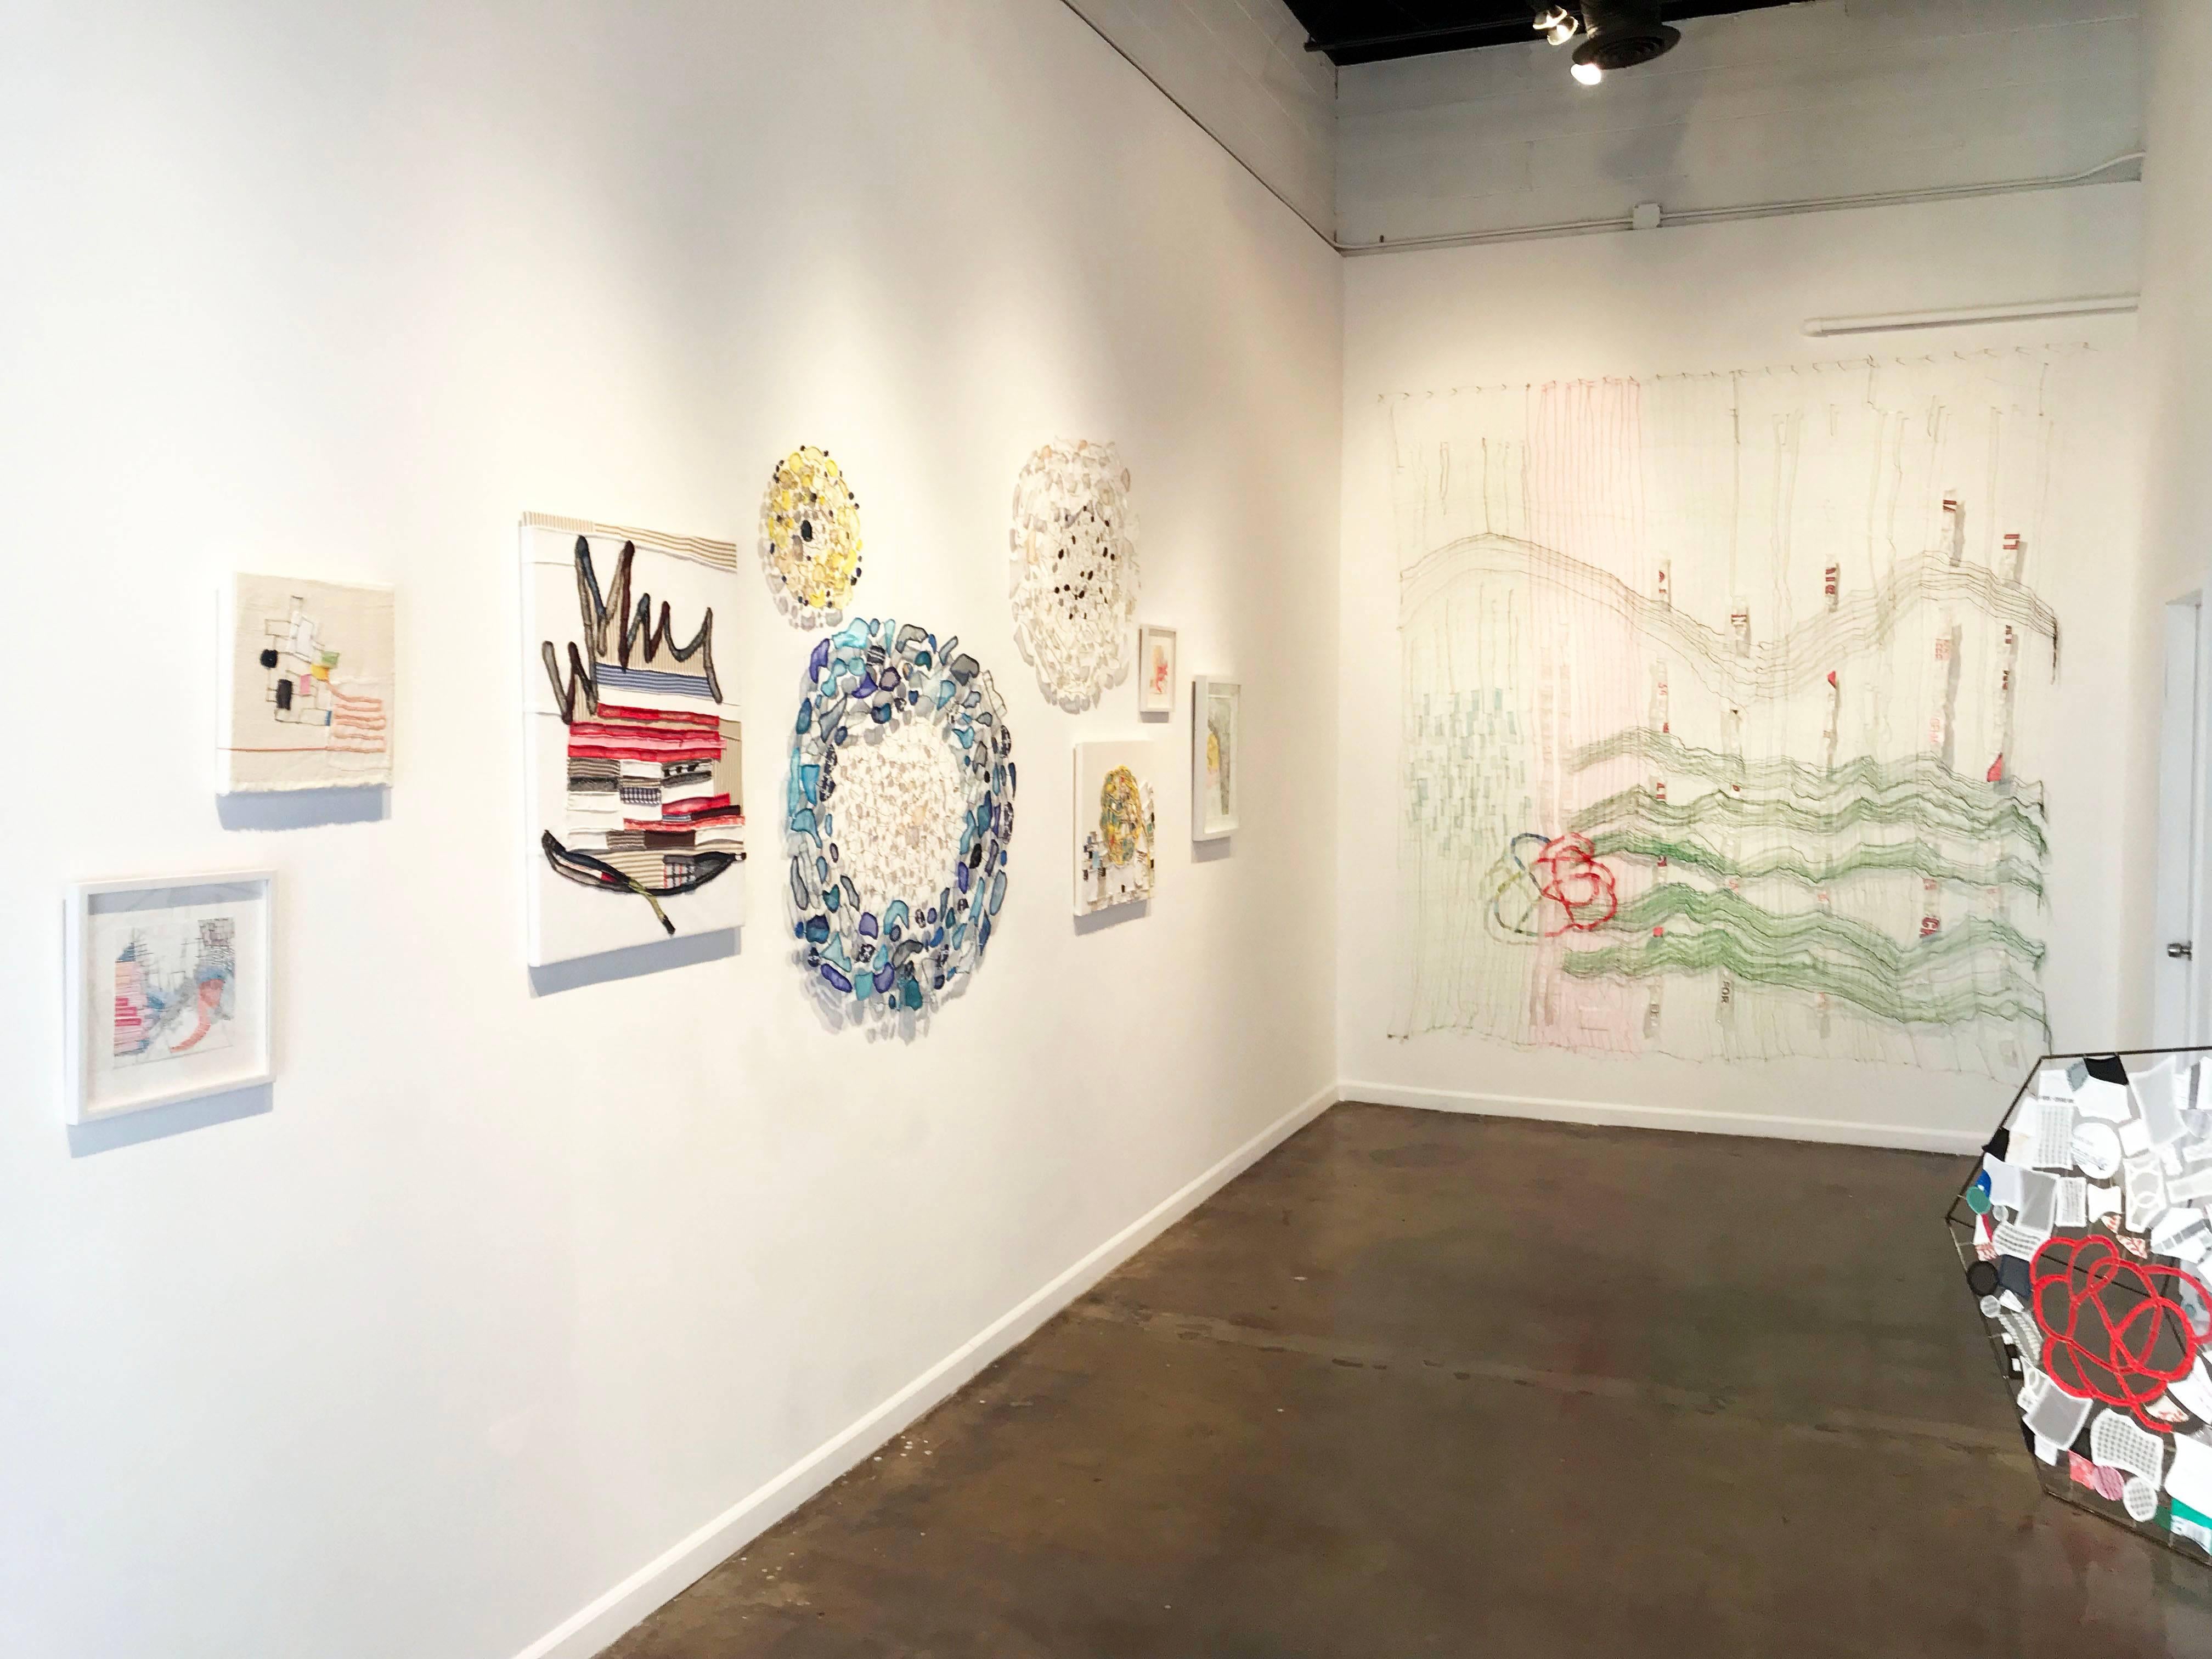 Untitled, 2016, 29 x 34”, suspended fabric, plastic, netting, pipe cleaners, thread, wire, fishing weights, $1,100.

Caroline Lathan-Stiefel’s delicately-webbed “drawings-in-space” cover, divide, encircle, and fill
spaces. Often large in scale, they